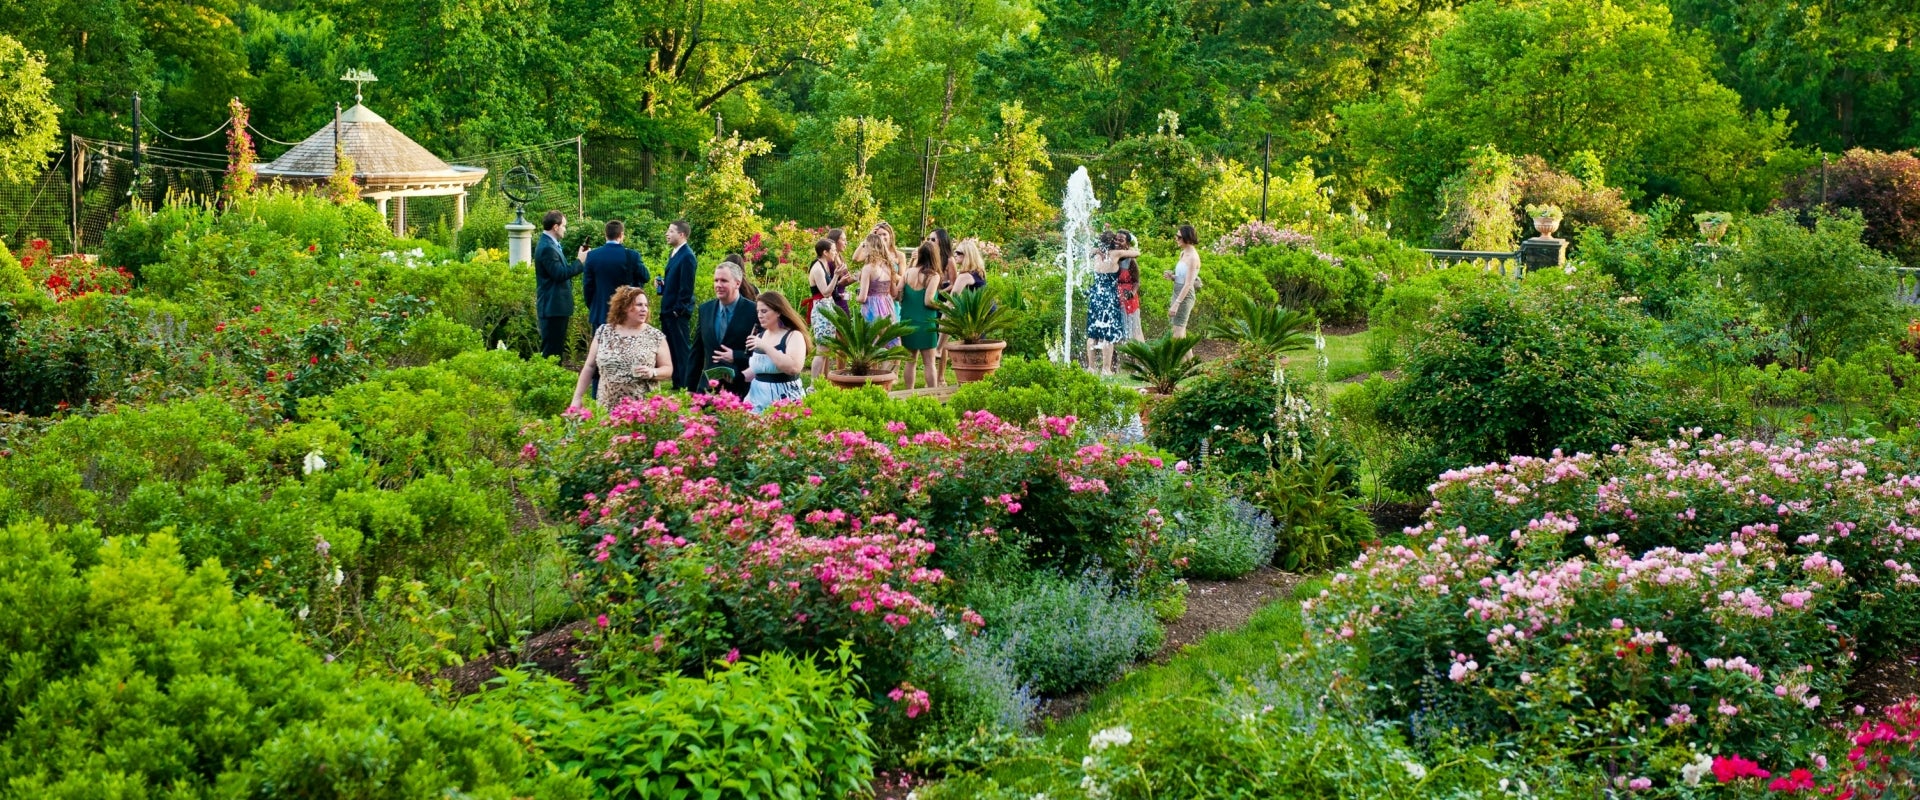 A group of people in informal attire mingling in a rose garden. 